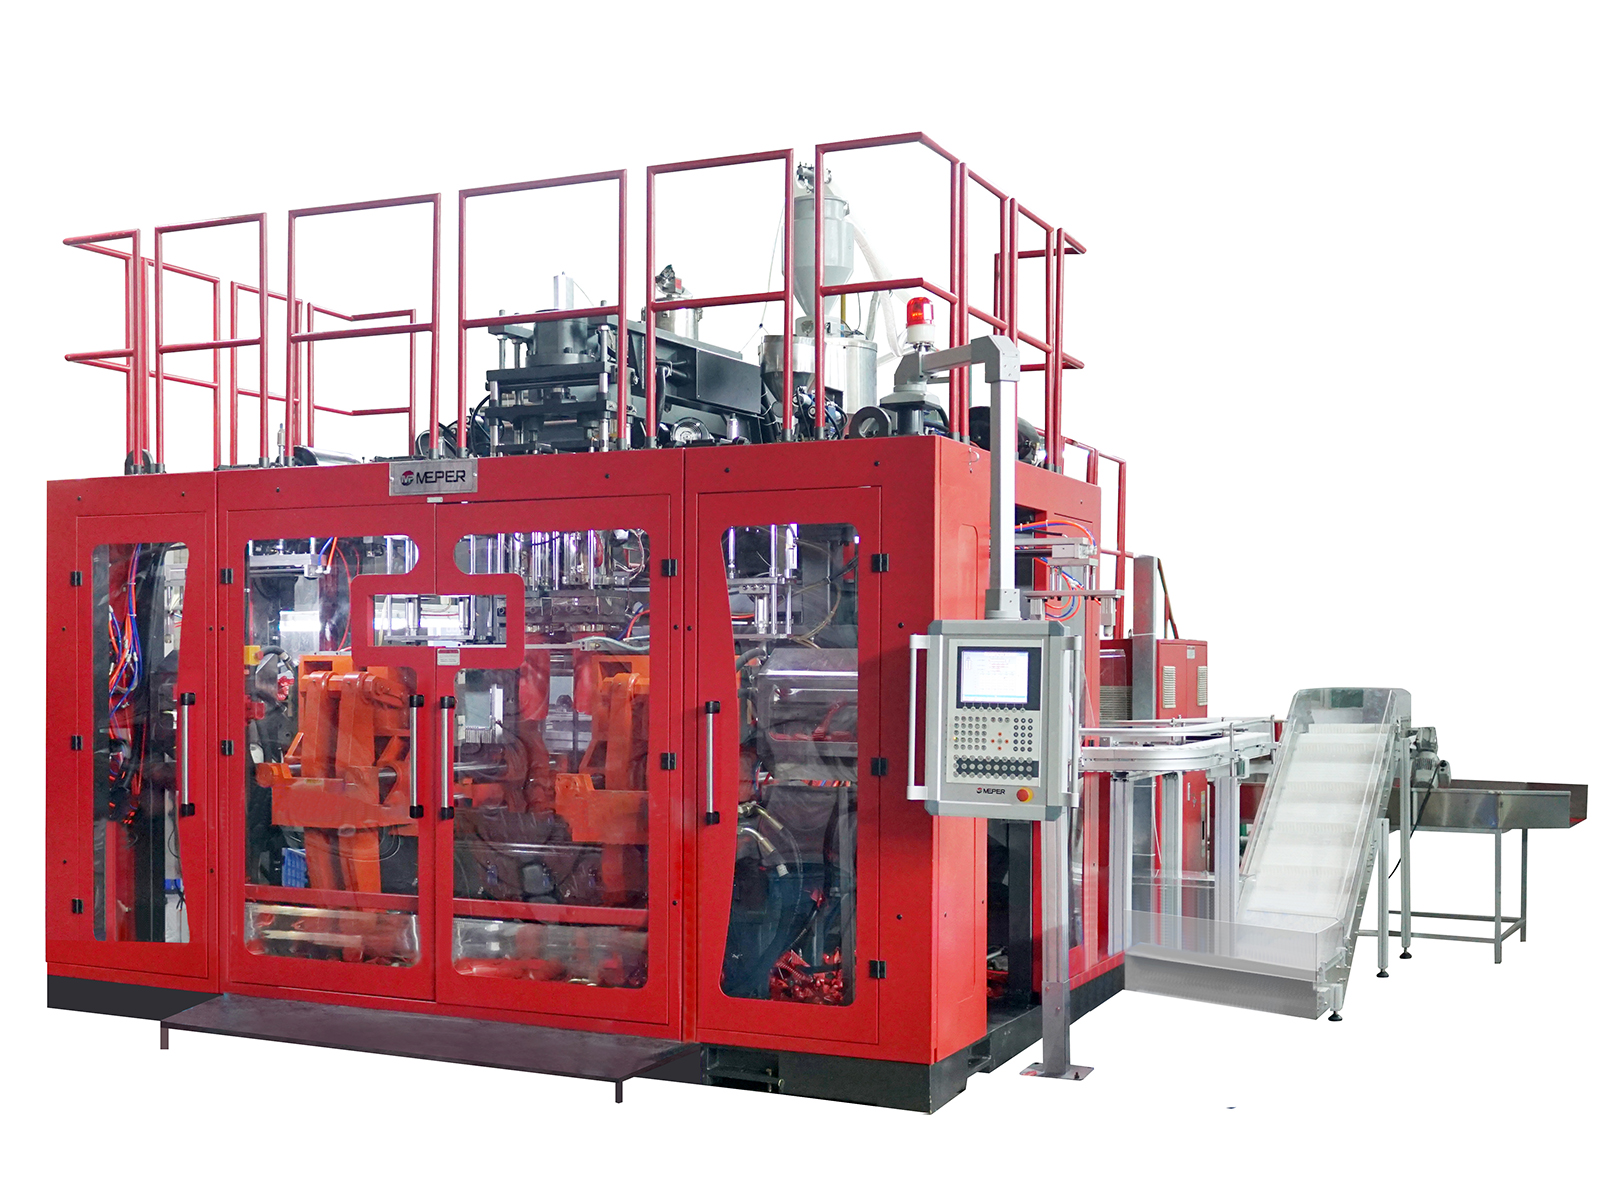 HOW TO FEED RAW MATERIAL & ARRANGE OPERATORS for MEPER MACHINE